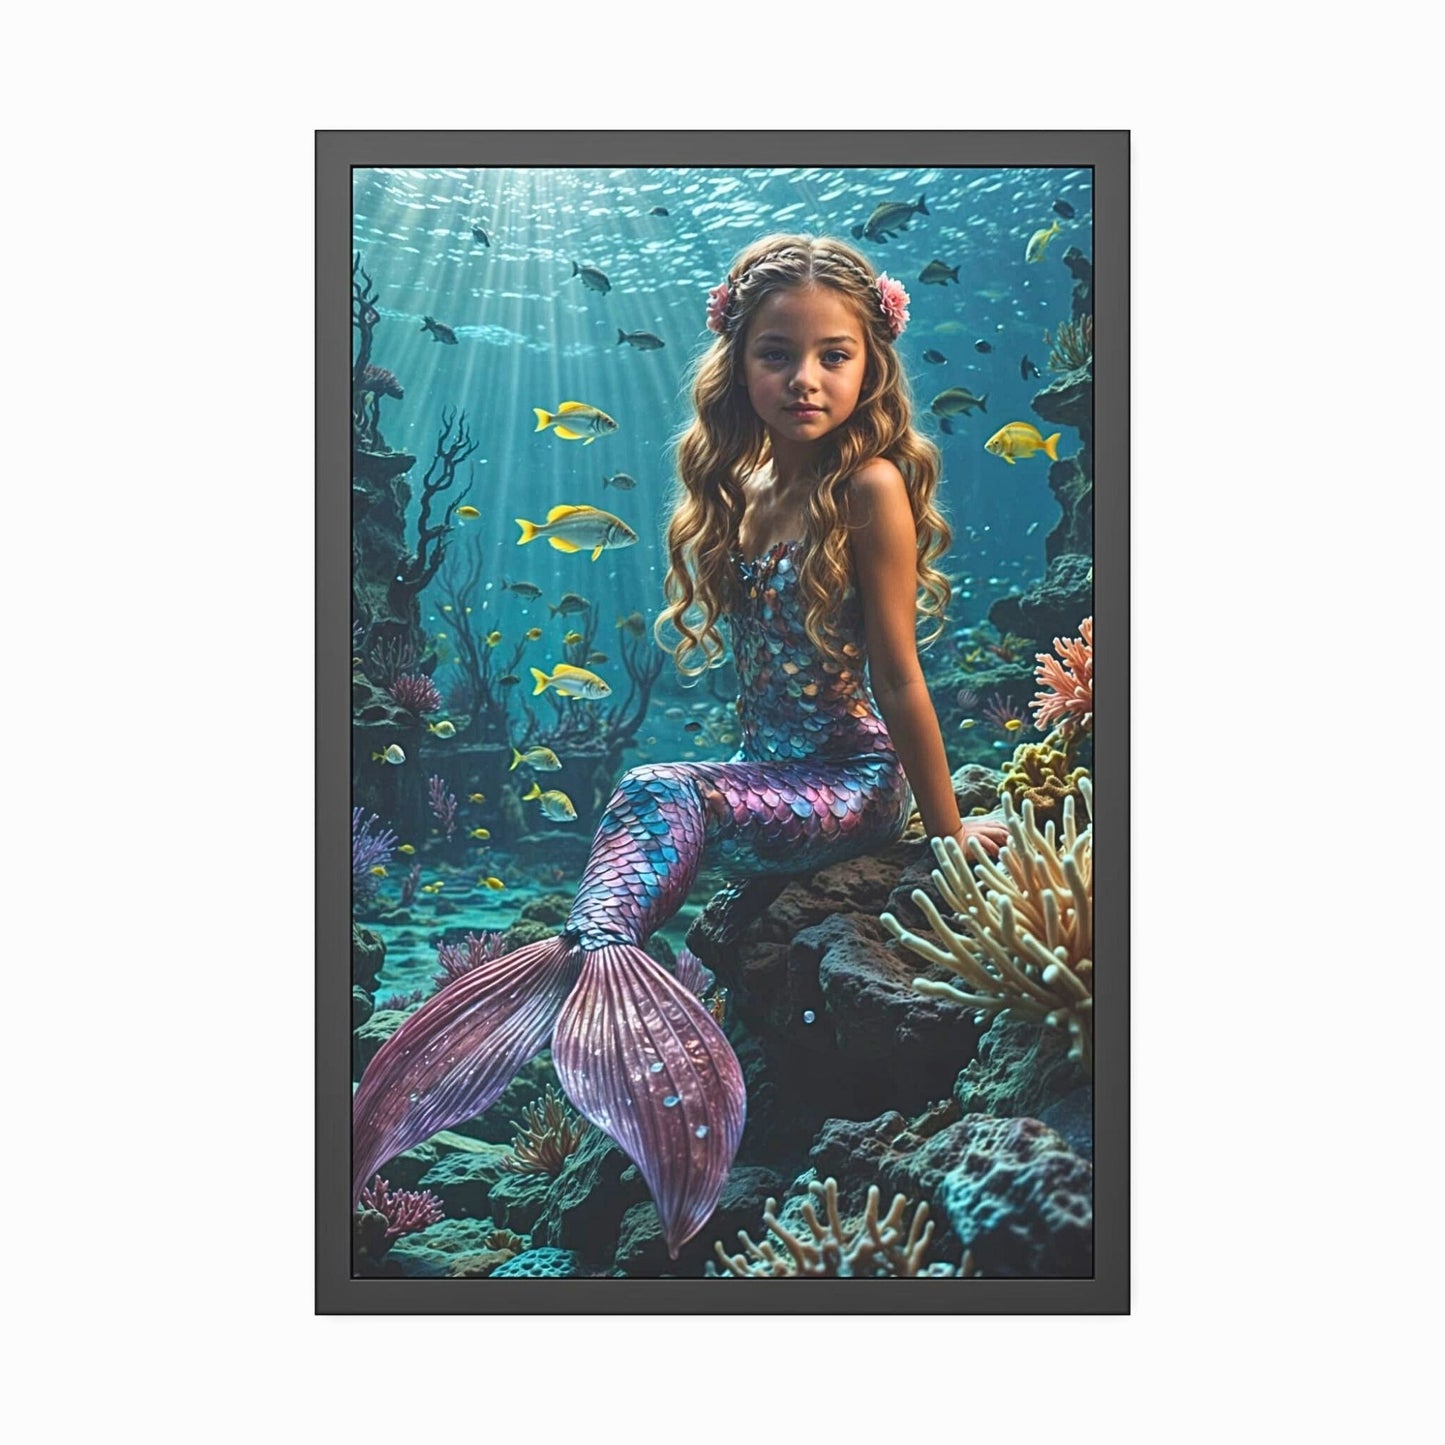 Create a one-of-a-kind Custom Mermaid Portrait from Photo, ideal for a Personalized Princess Mermaid Portrait for your daughter's Birthday. Turn any photo into stunning Wall Art, perfect for daughters, sisters, moms, and girlfriends. These unique Custom Mermaid Art portraits make unforgettable gifts, transforming special moments into magical keepsakes. Celebrate any occasion with a personalized mermaid treasure.